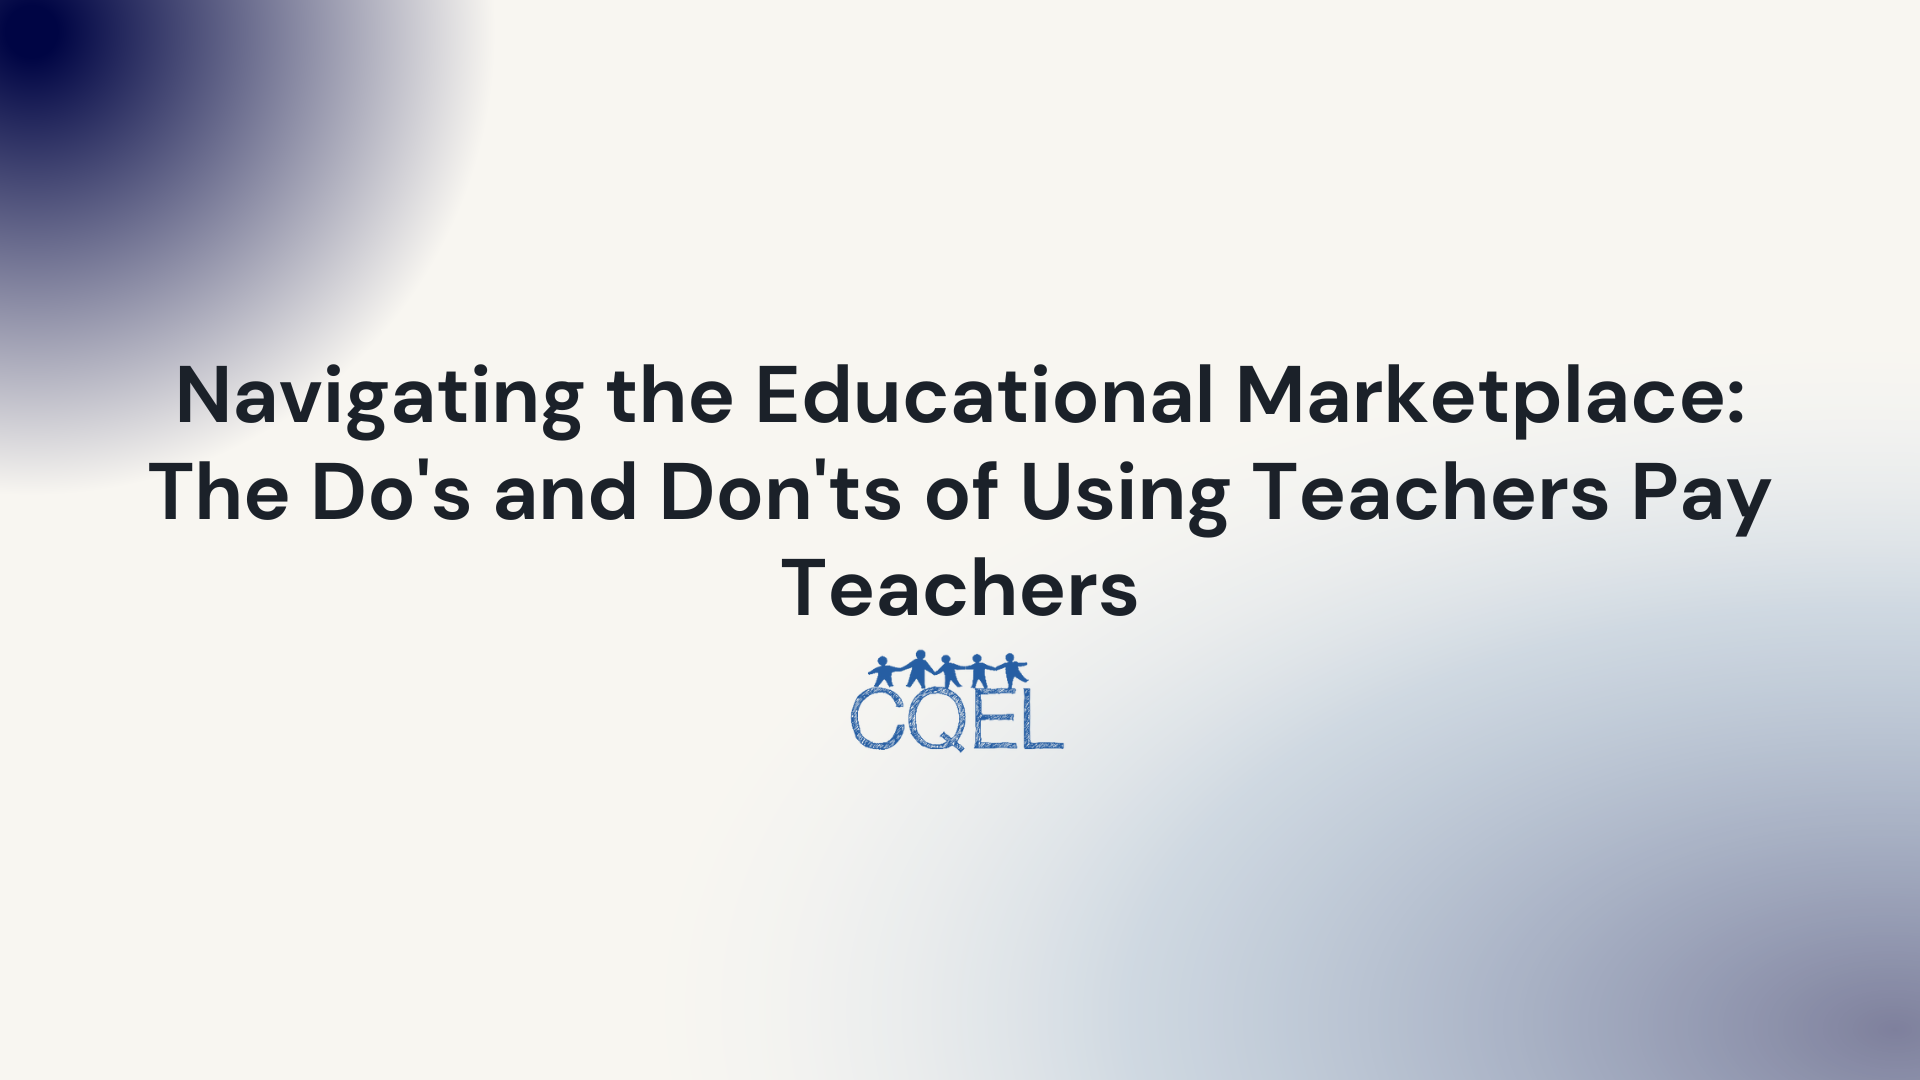 Navigating the Educational Marketplace: The Do's and Don'ts of Using Teachers Pay Teachers